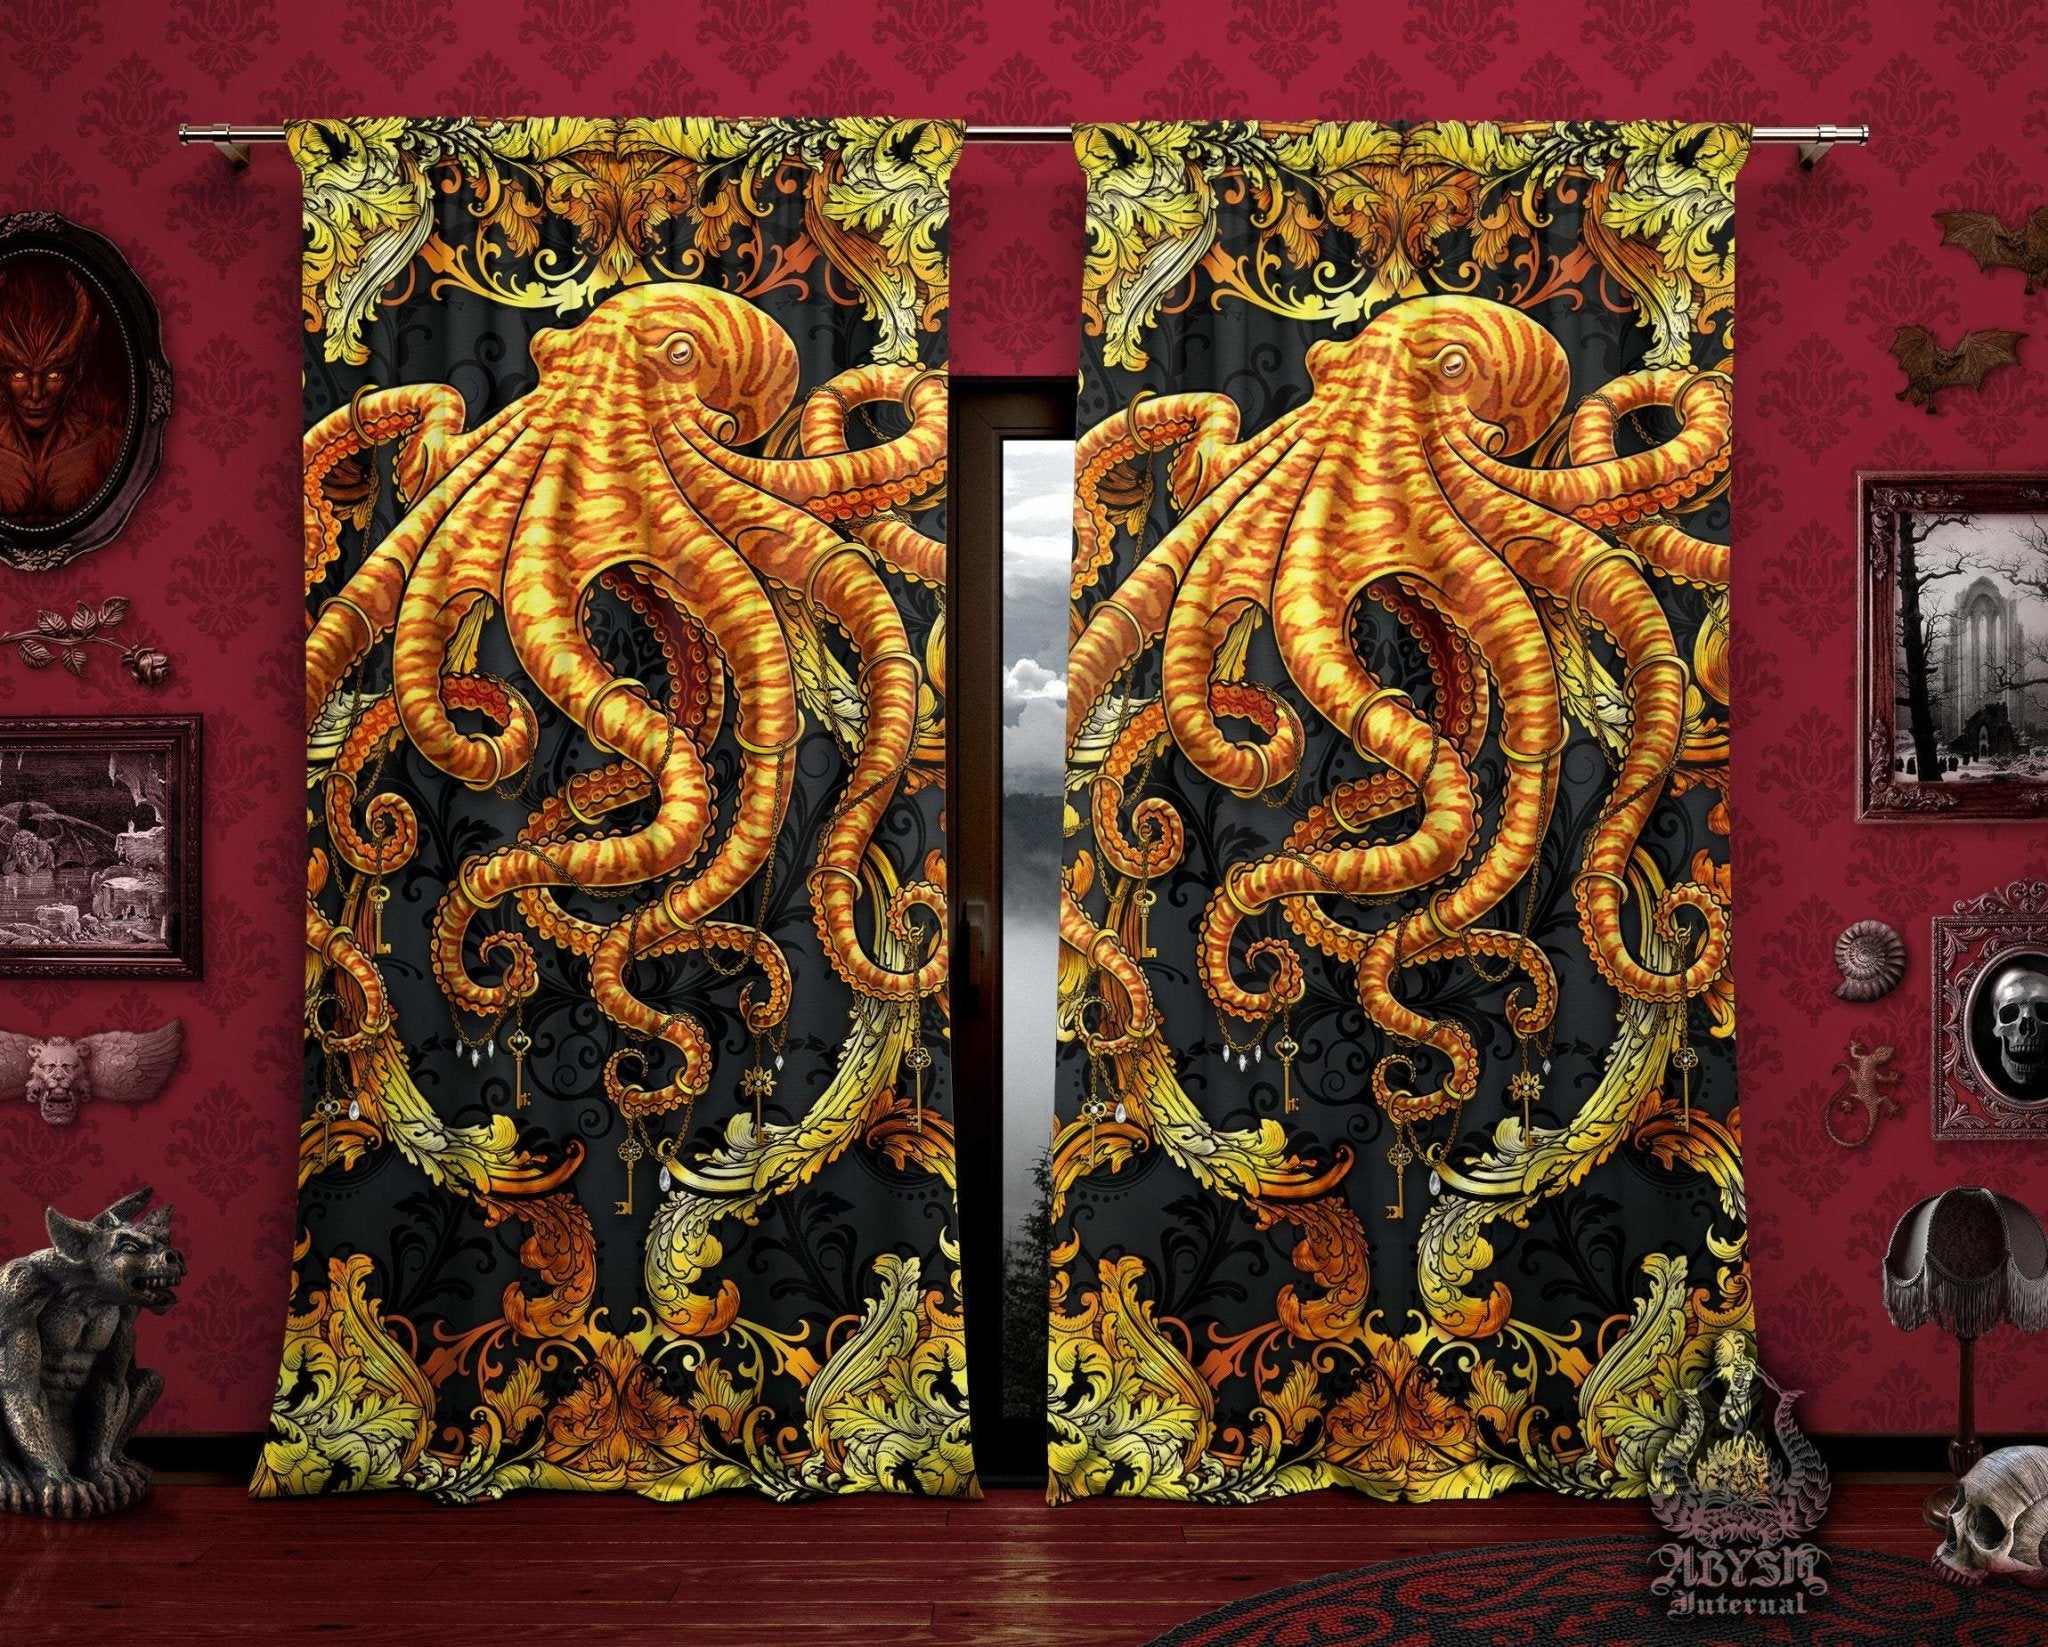 Octopus Blackout Curtains, Long Window Panels, Coastal and Indie Room Decor, Art Print - Gold & Black - Abysm Internal